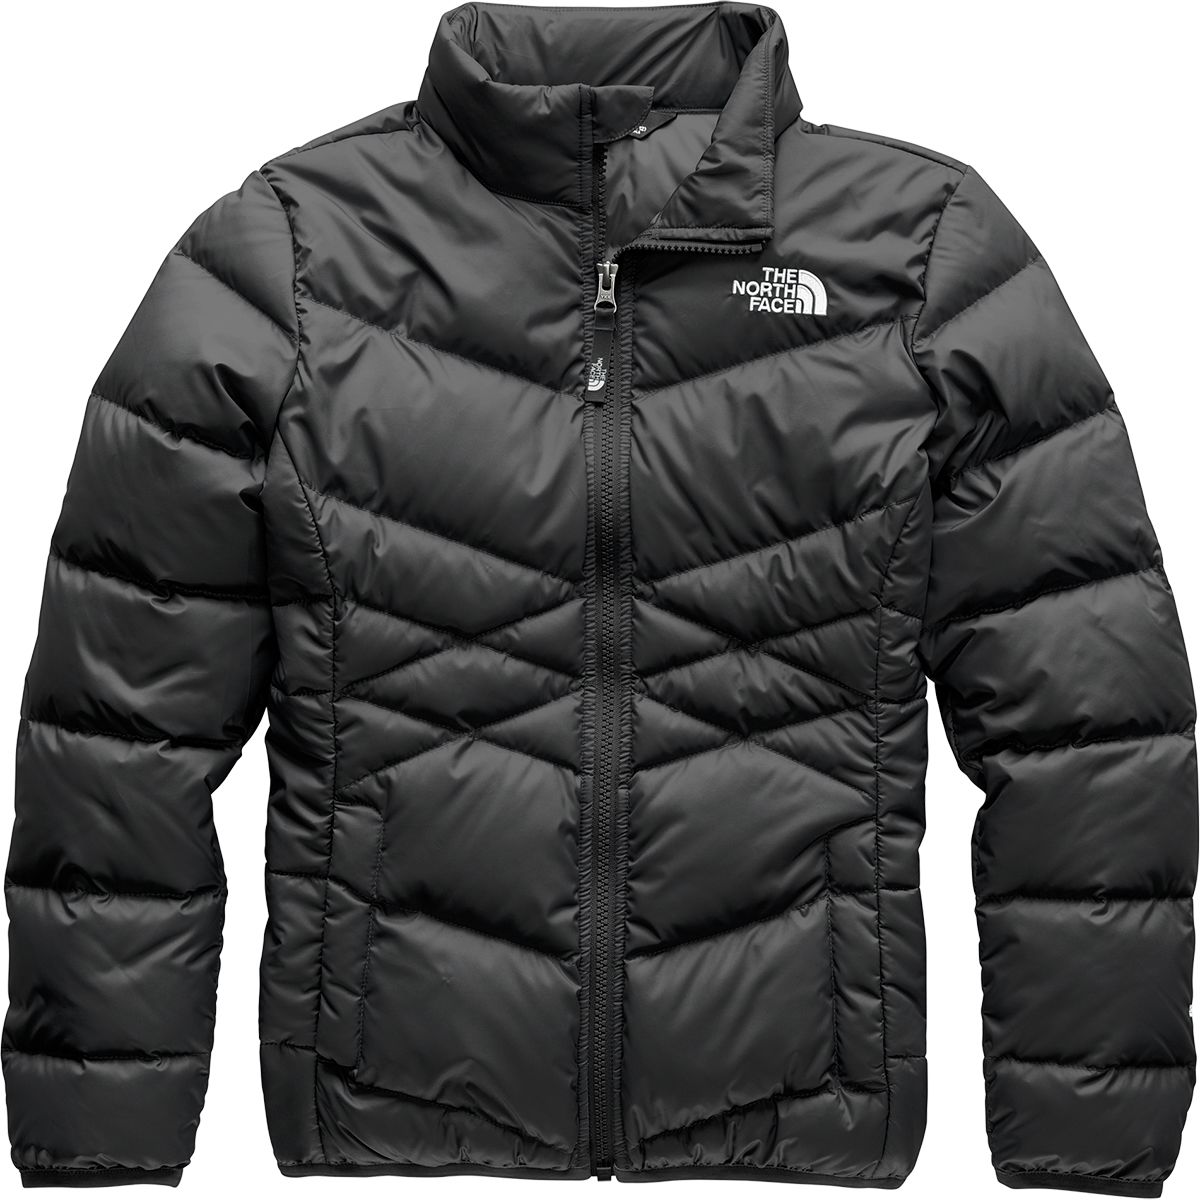 The North Face Andes Down Jacket - Girls' | Backcountry.com